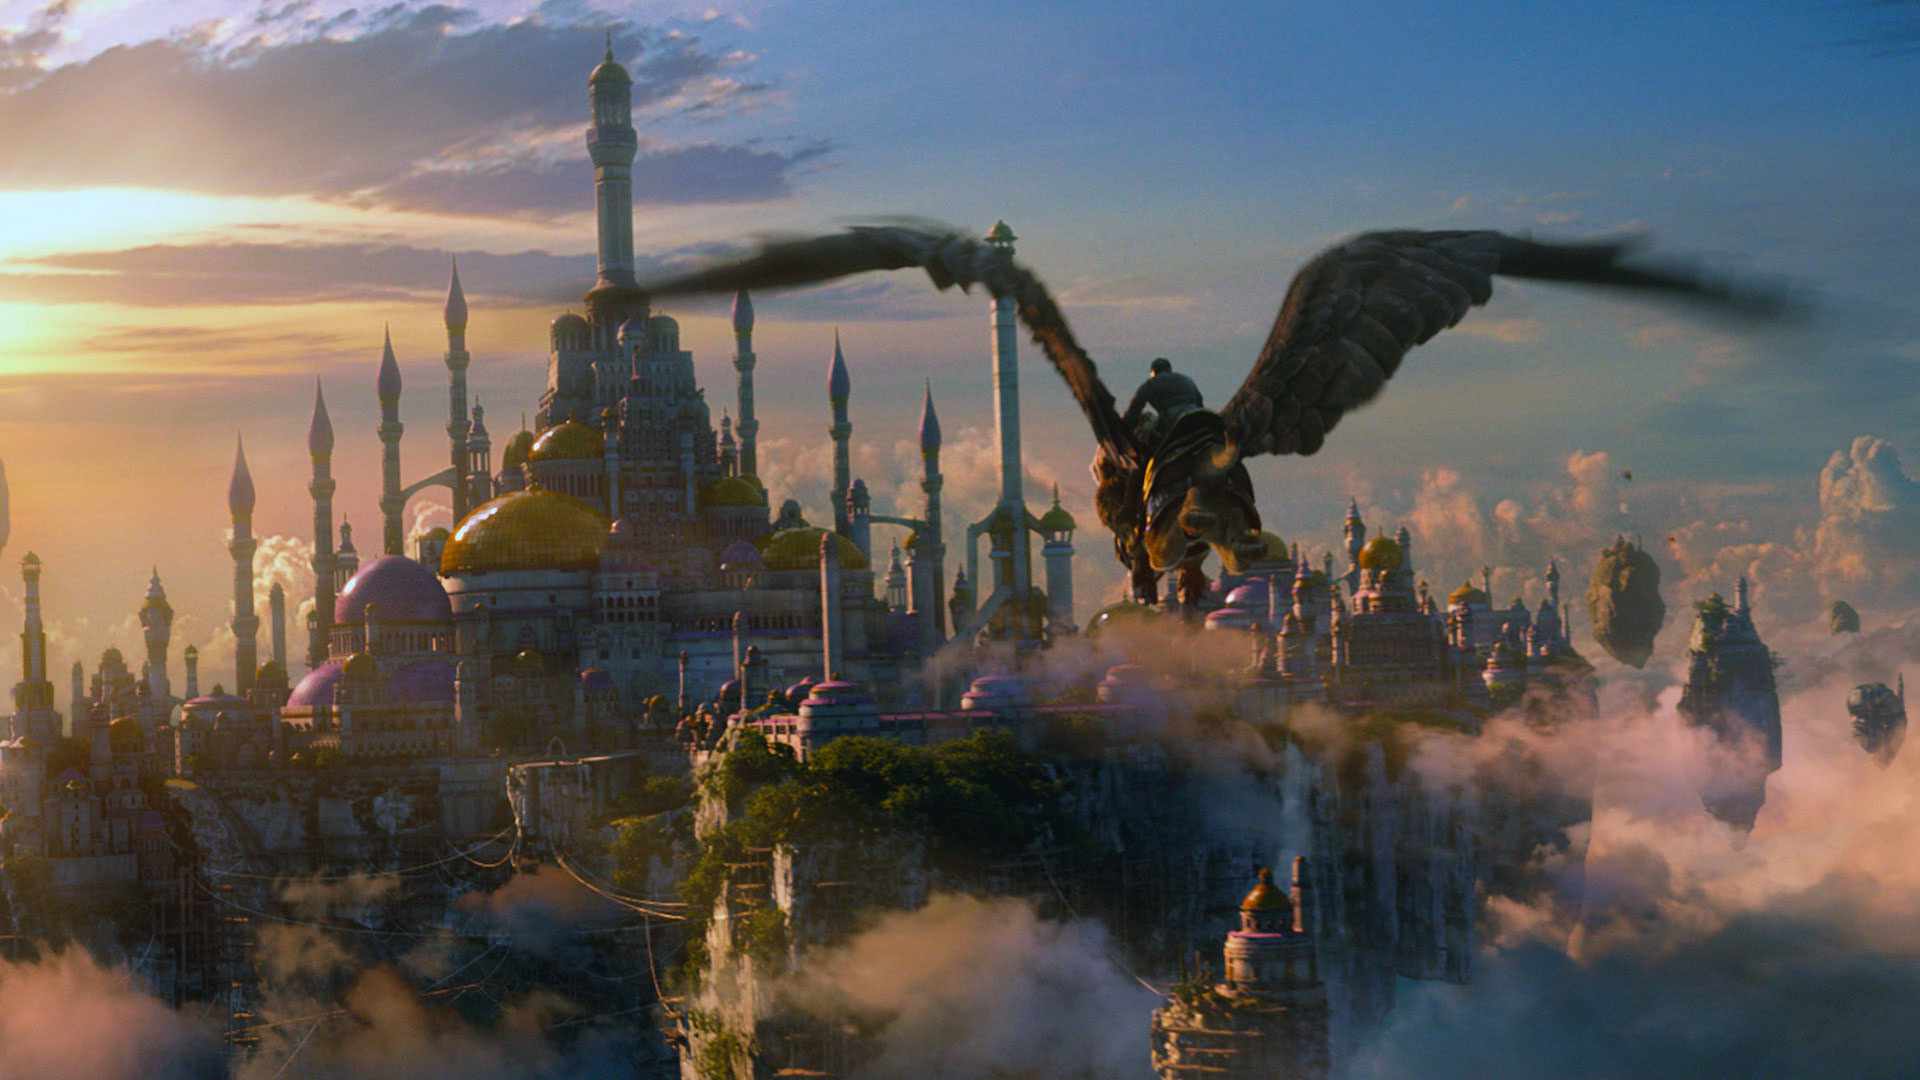 Warcraft (Movie): A 2016 action fantasy film based on the video game series of the same name. 1920x1080 Full HD Background.